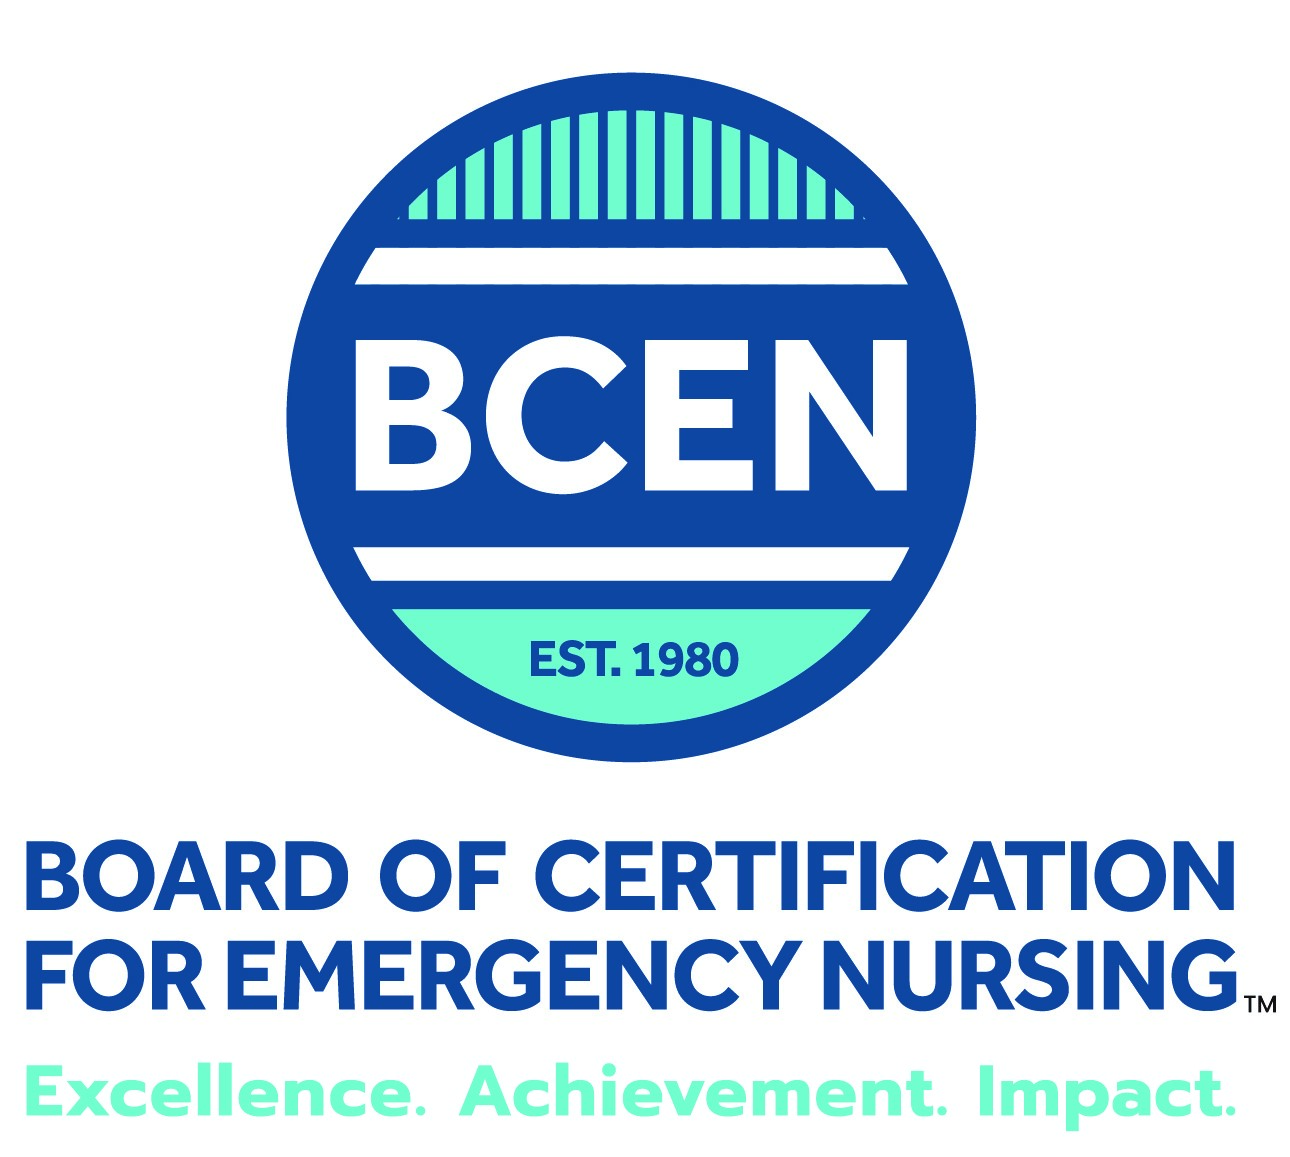 All of BCEN's emergency, trauma and transport nursing specialty certification programs are accredited by the ABSNC.